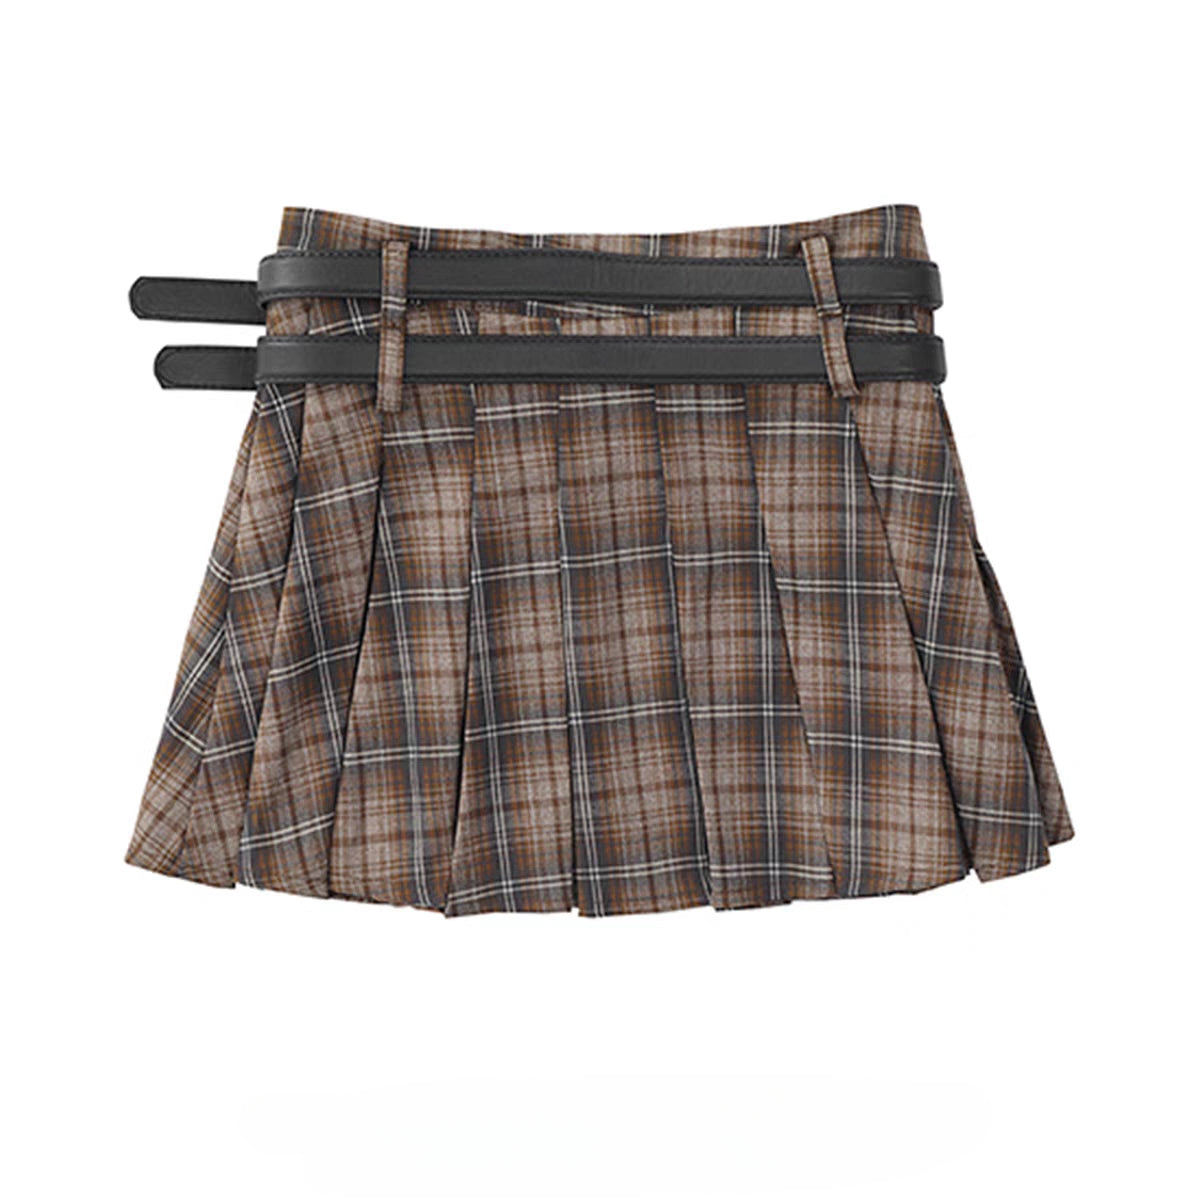 Women's Korean Style Plaid Pleated Skirt with Double Belts